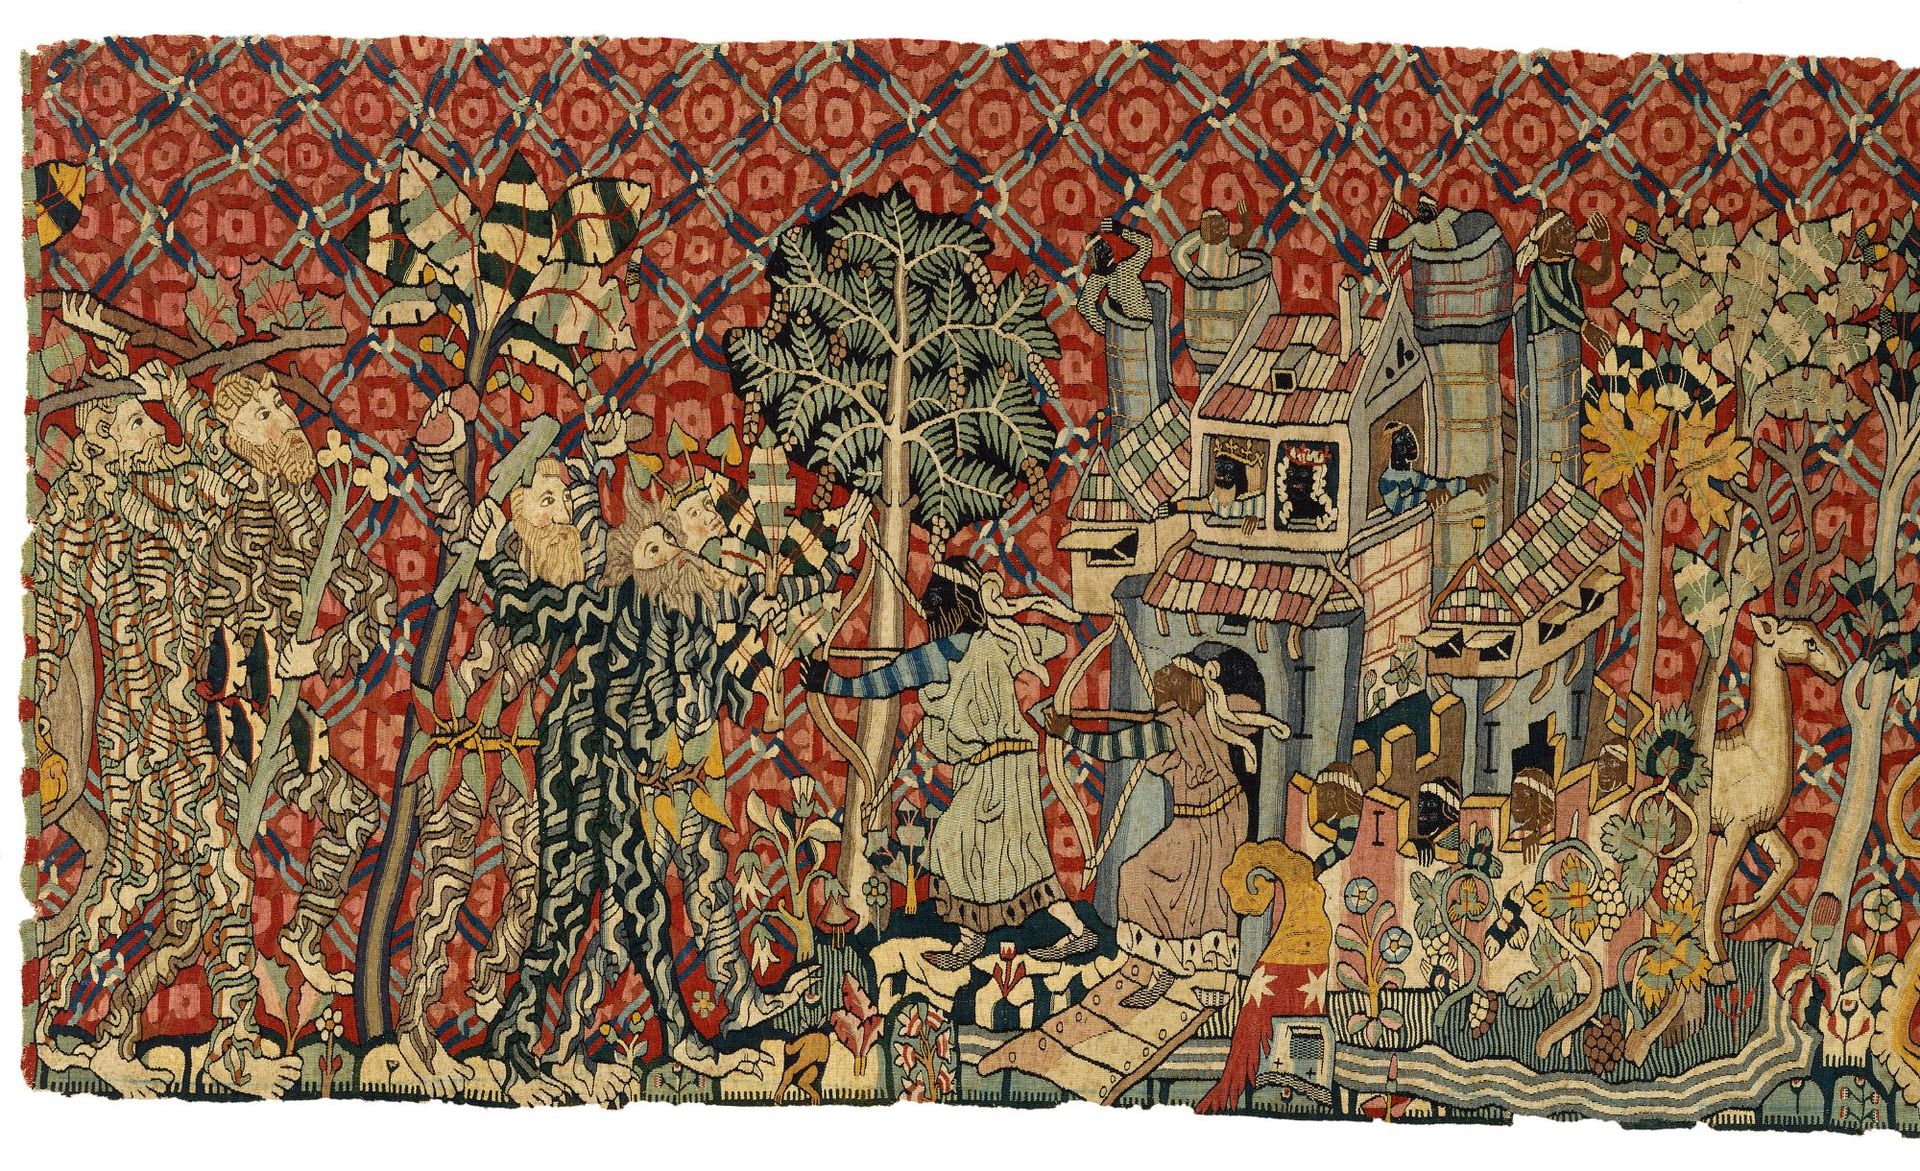 A detail of the tapestry Wild Men and Moors, from about 1440 Charles Potter Kling Fund. Photograph © Museum of Fine Arts, Boston